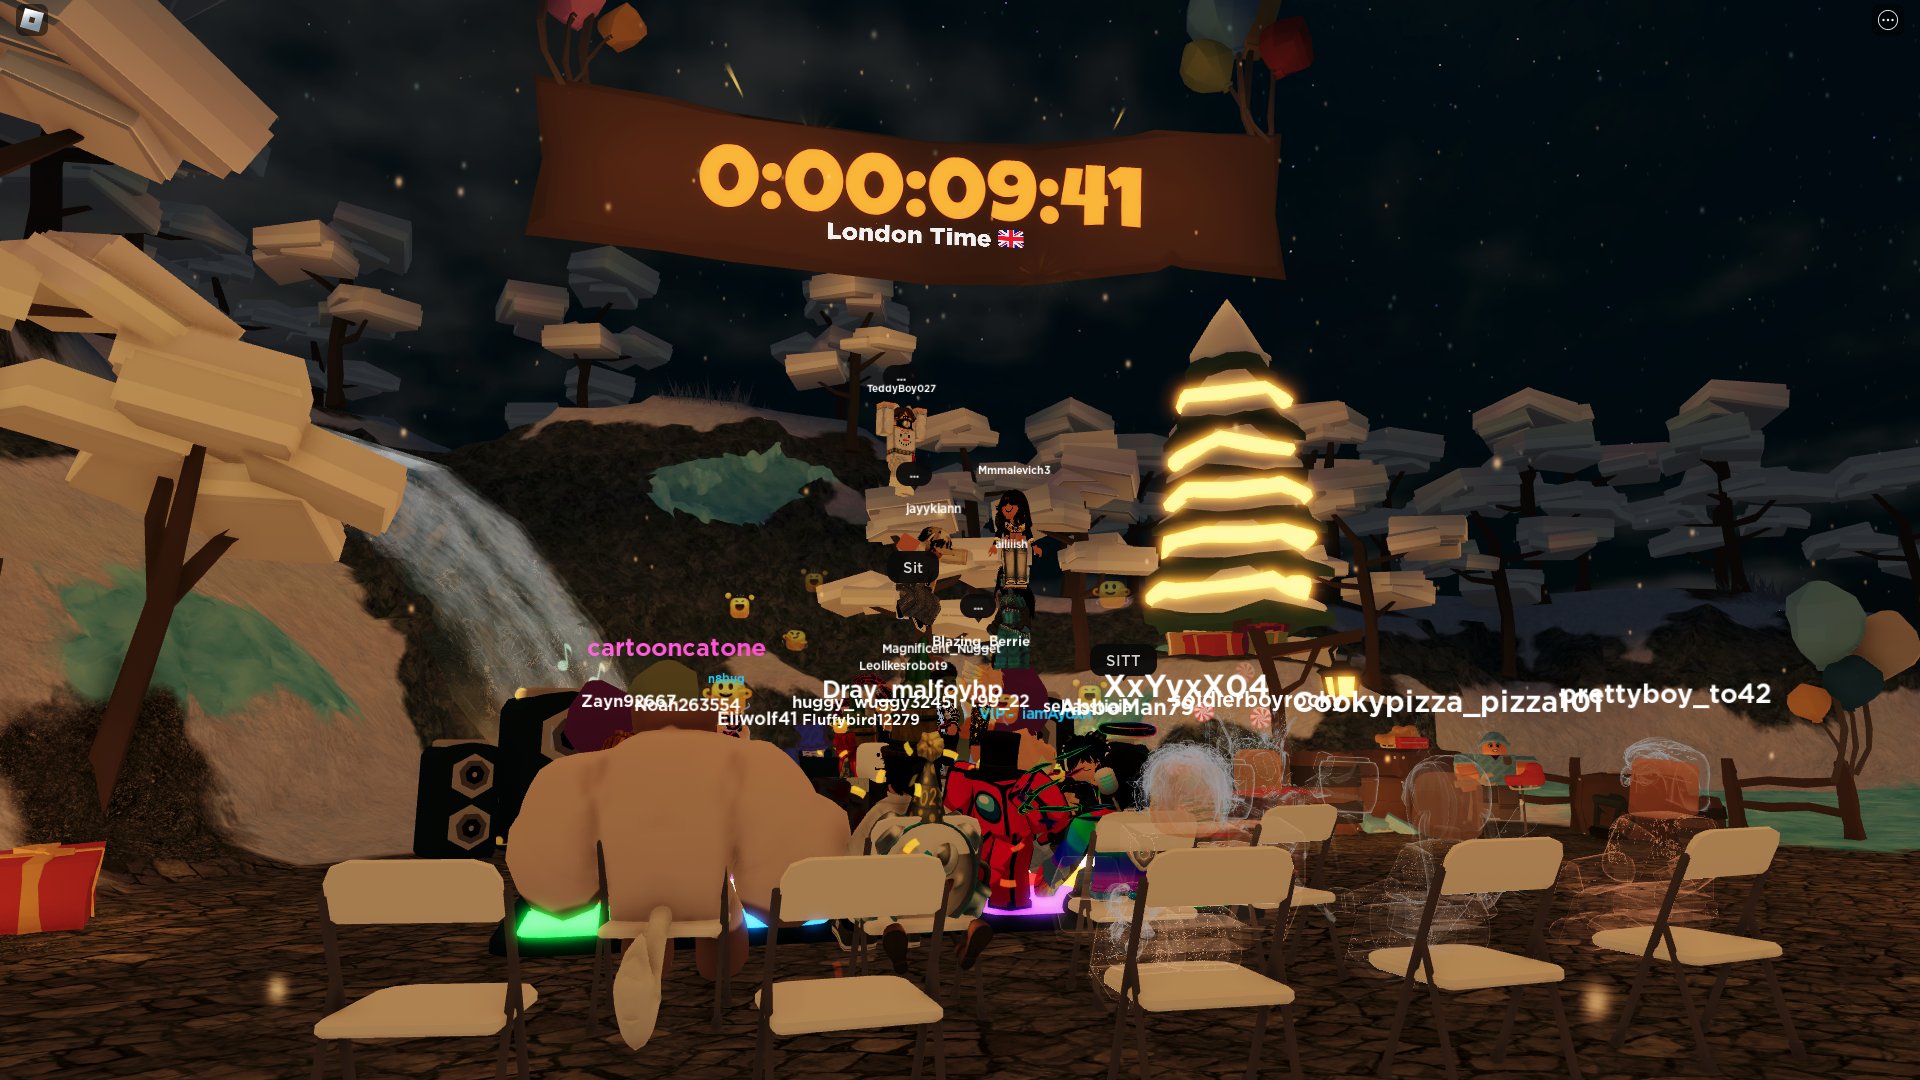 Roblox 2024 Countdown (@robloxnewyears) / X